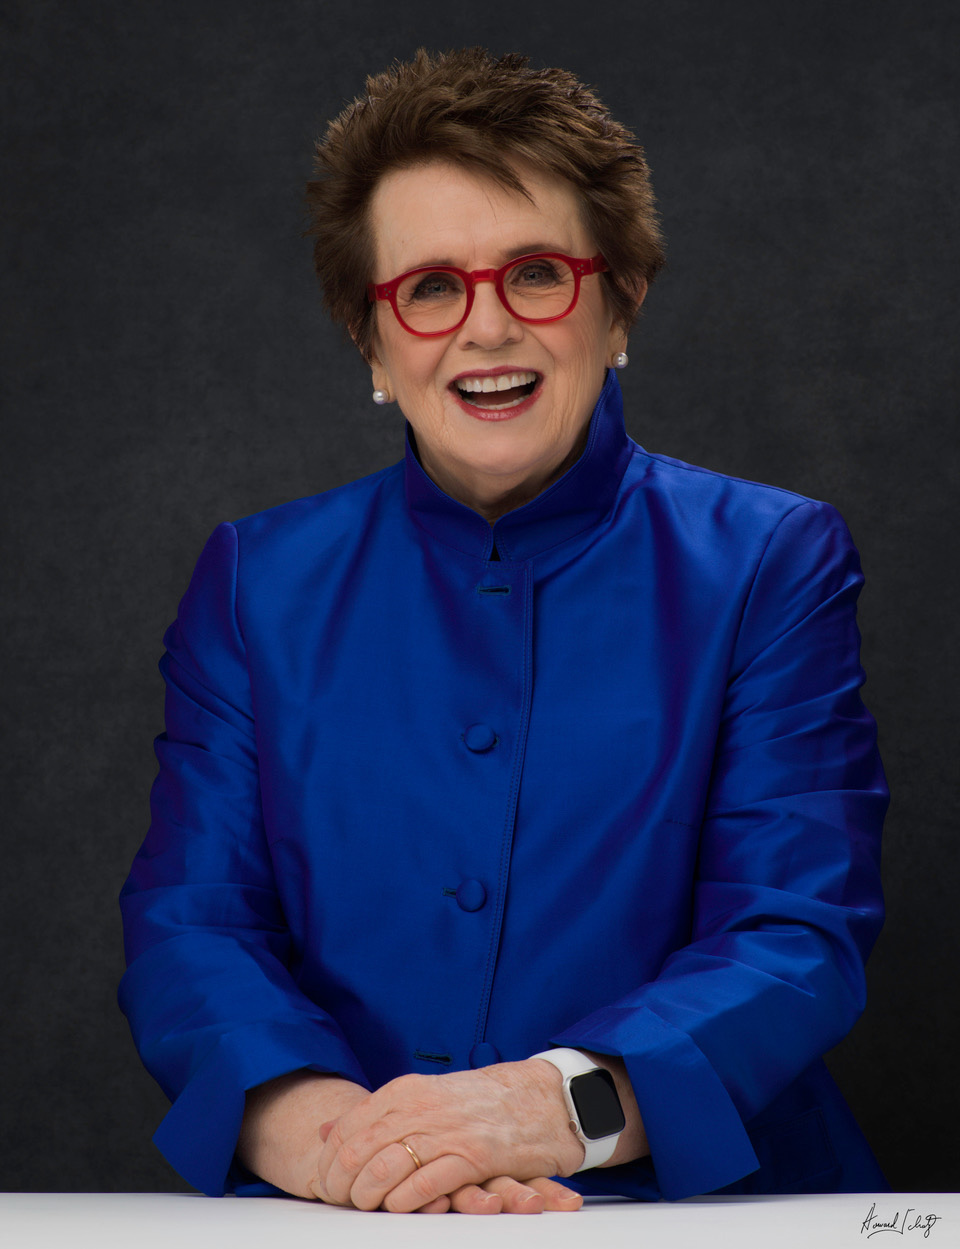 Billie Jean King teams up with Jane Walker by Johnnie Walker for First Women campaign celebrating and inspiring women breaking boundaries.